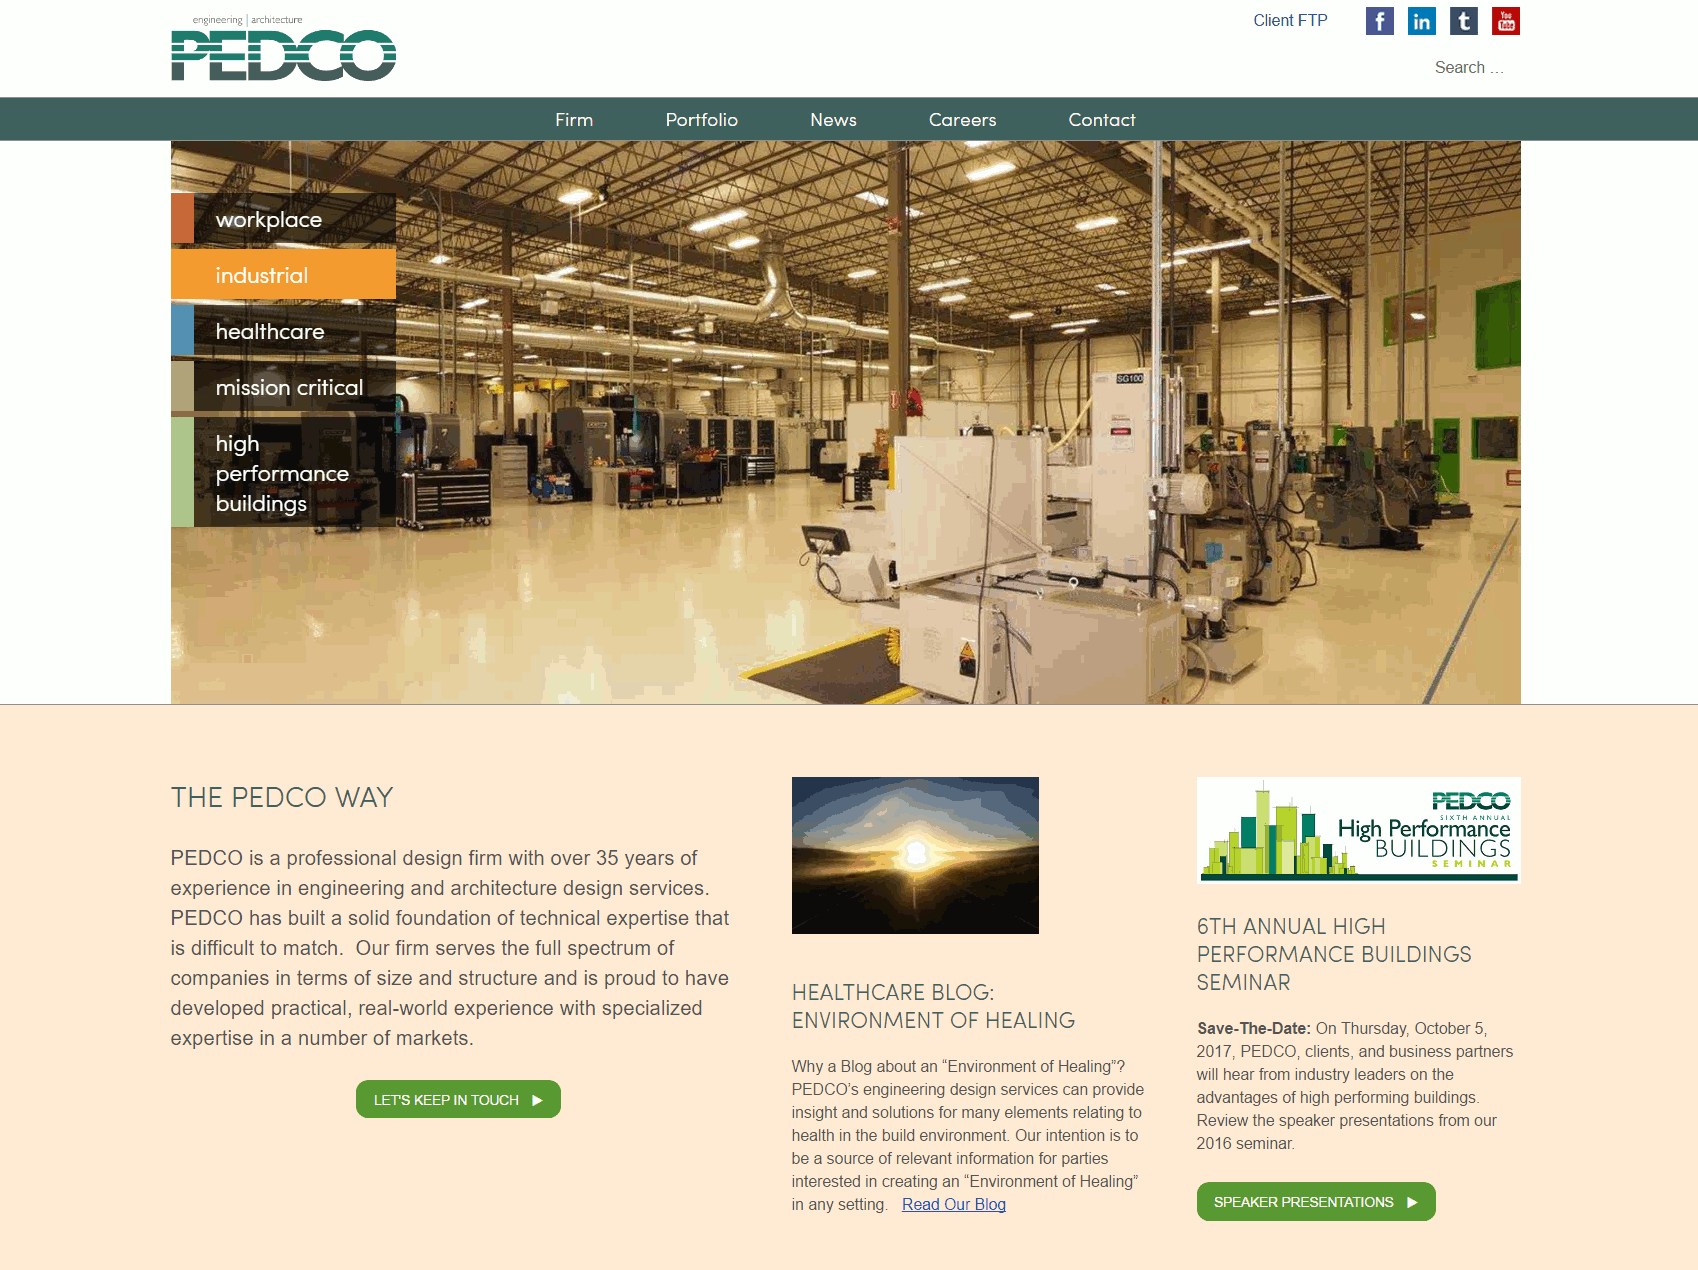 PEDCO Engineering and Architecture website design